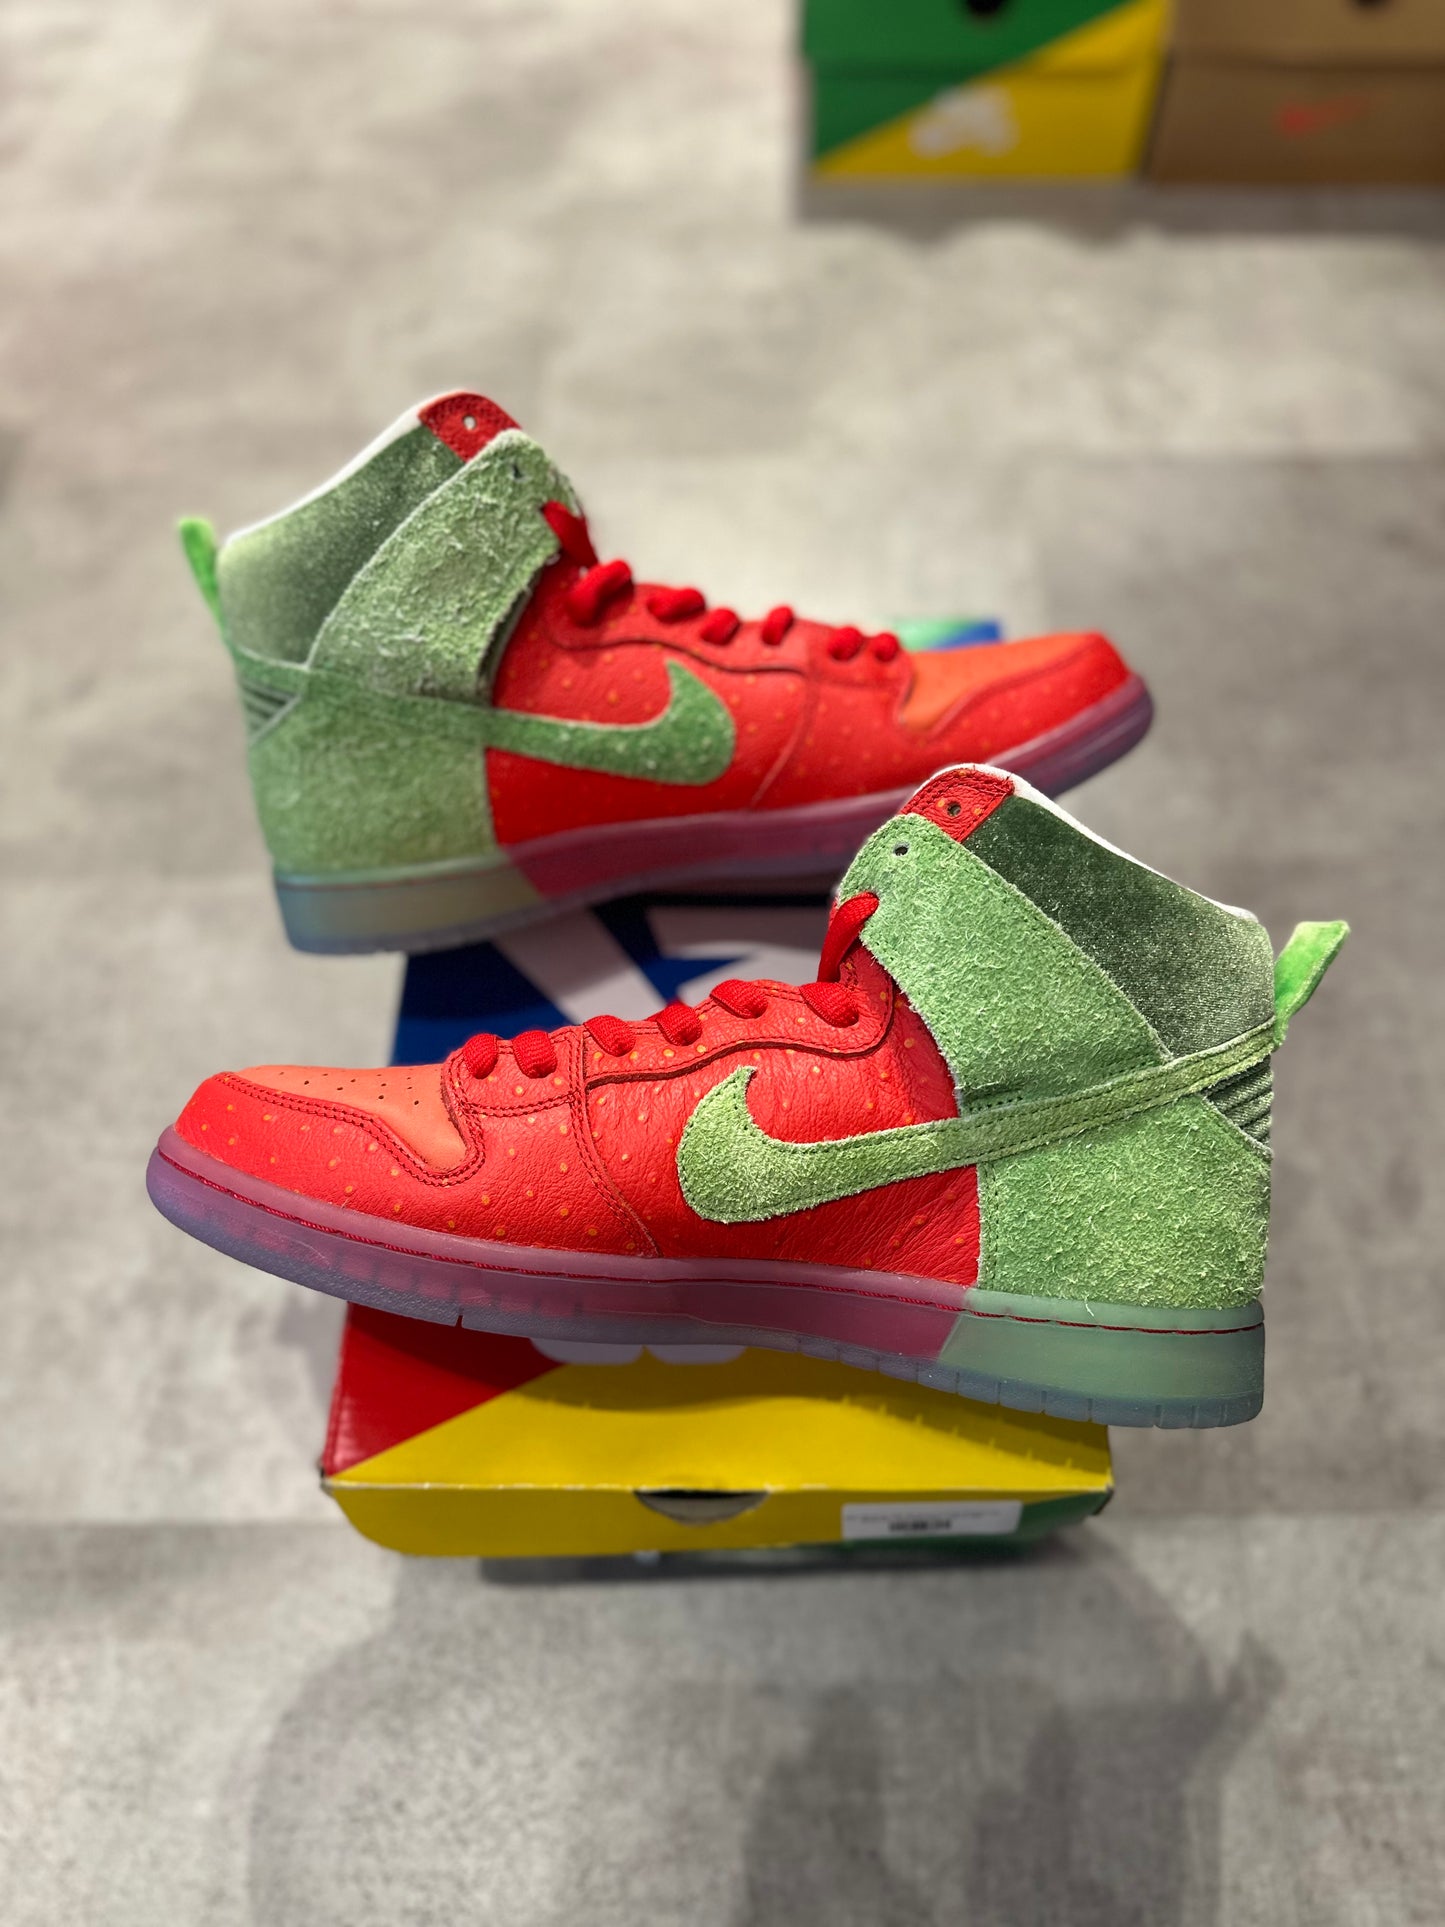 Nike SB Dunk High Strawberry Cough (Preowned)